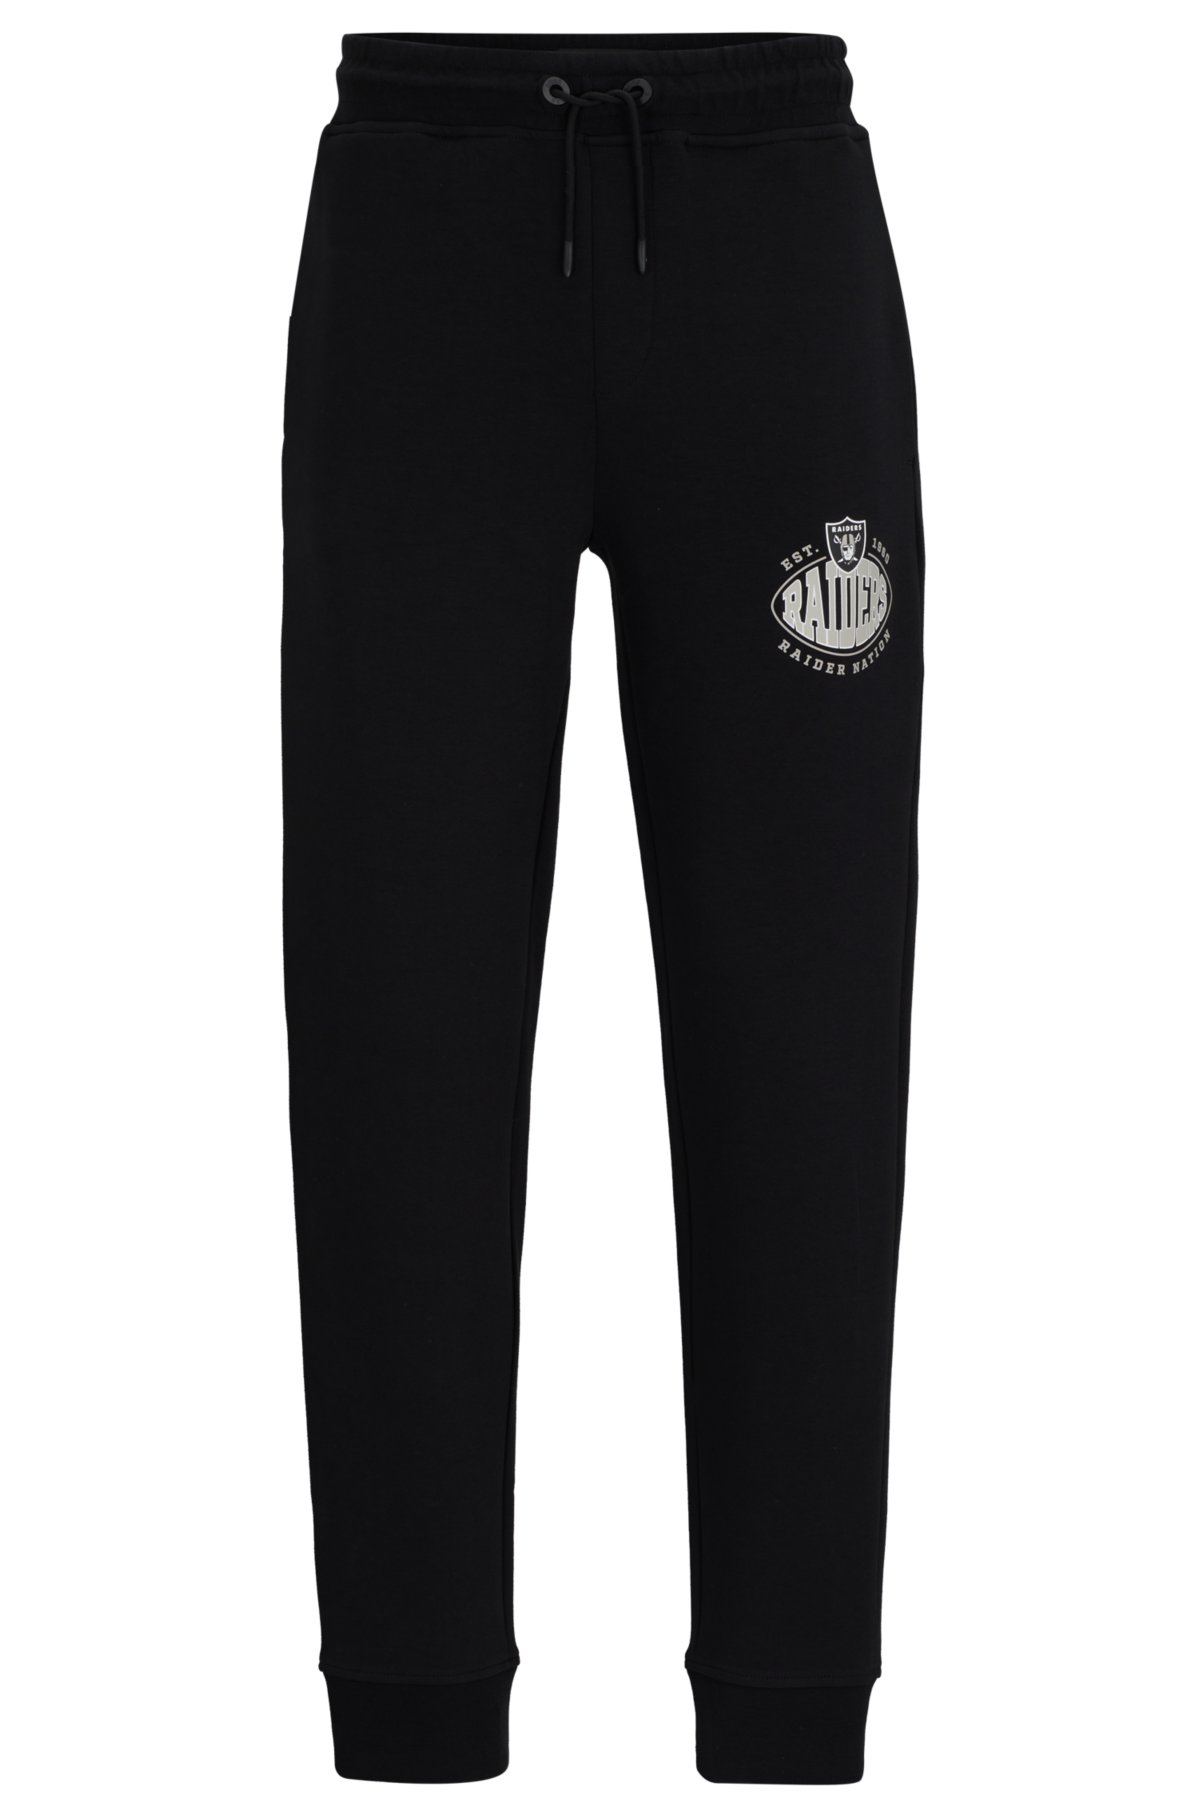 BOSS x NFL cotton-blend tracksuit bottoms with collaborative branding, Raiders